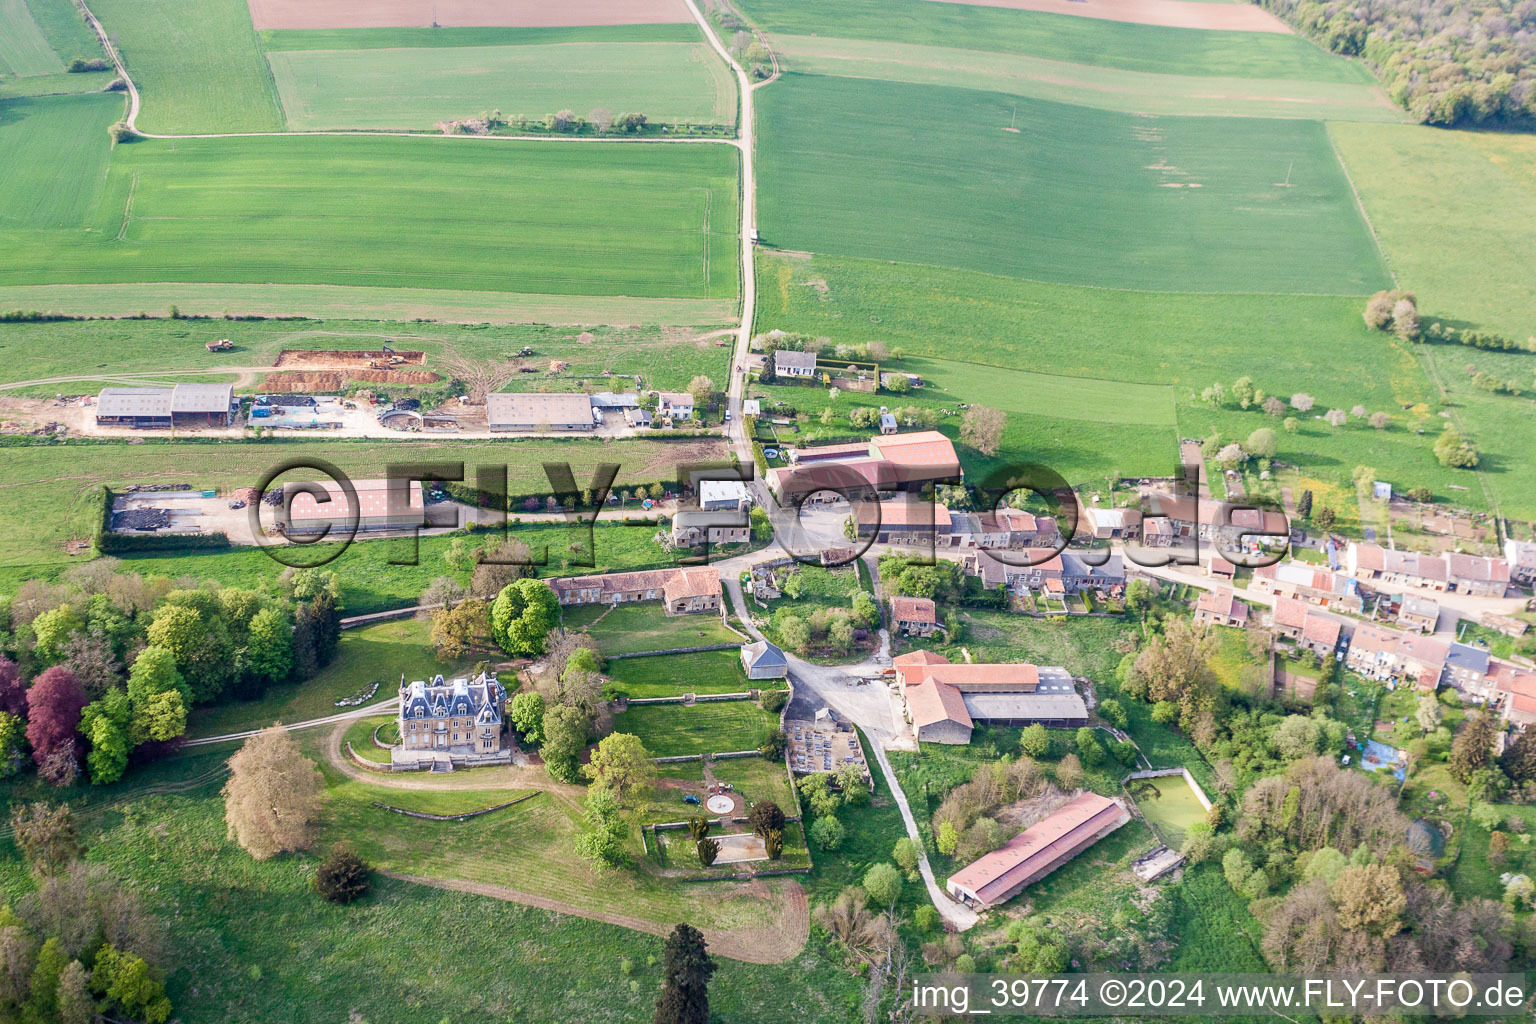 Village - view on the edge of agricultural fields and farmland in Fresnois in Grand Est, France